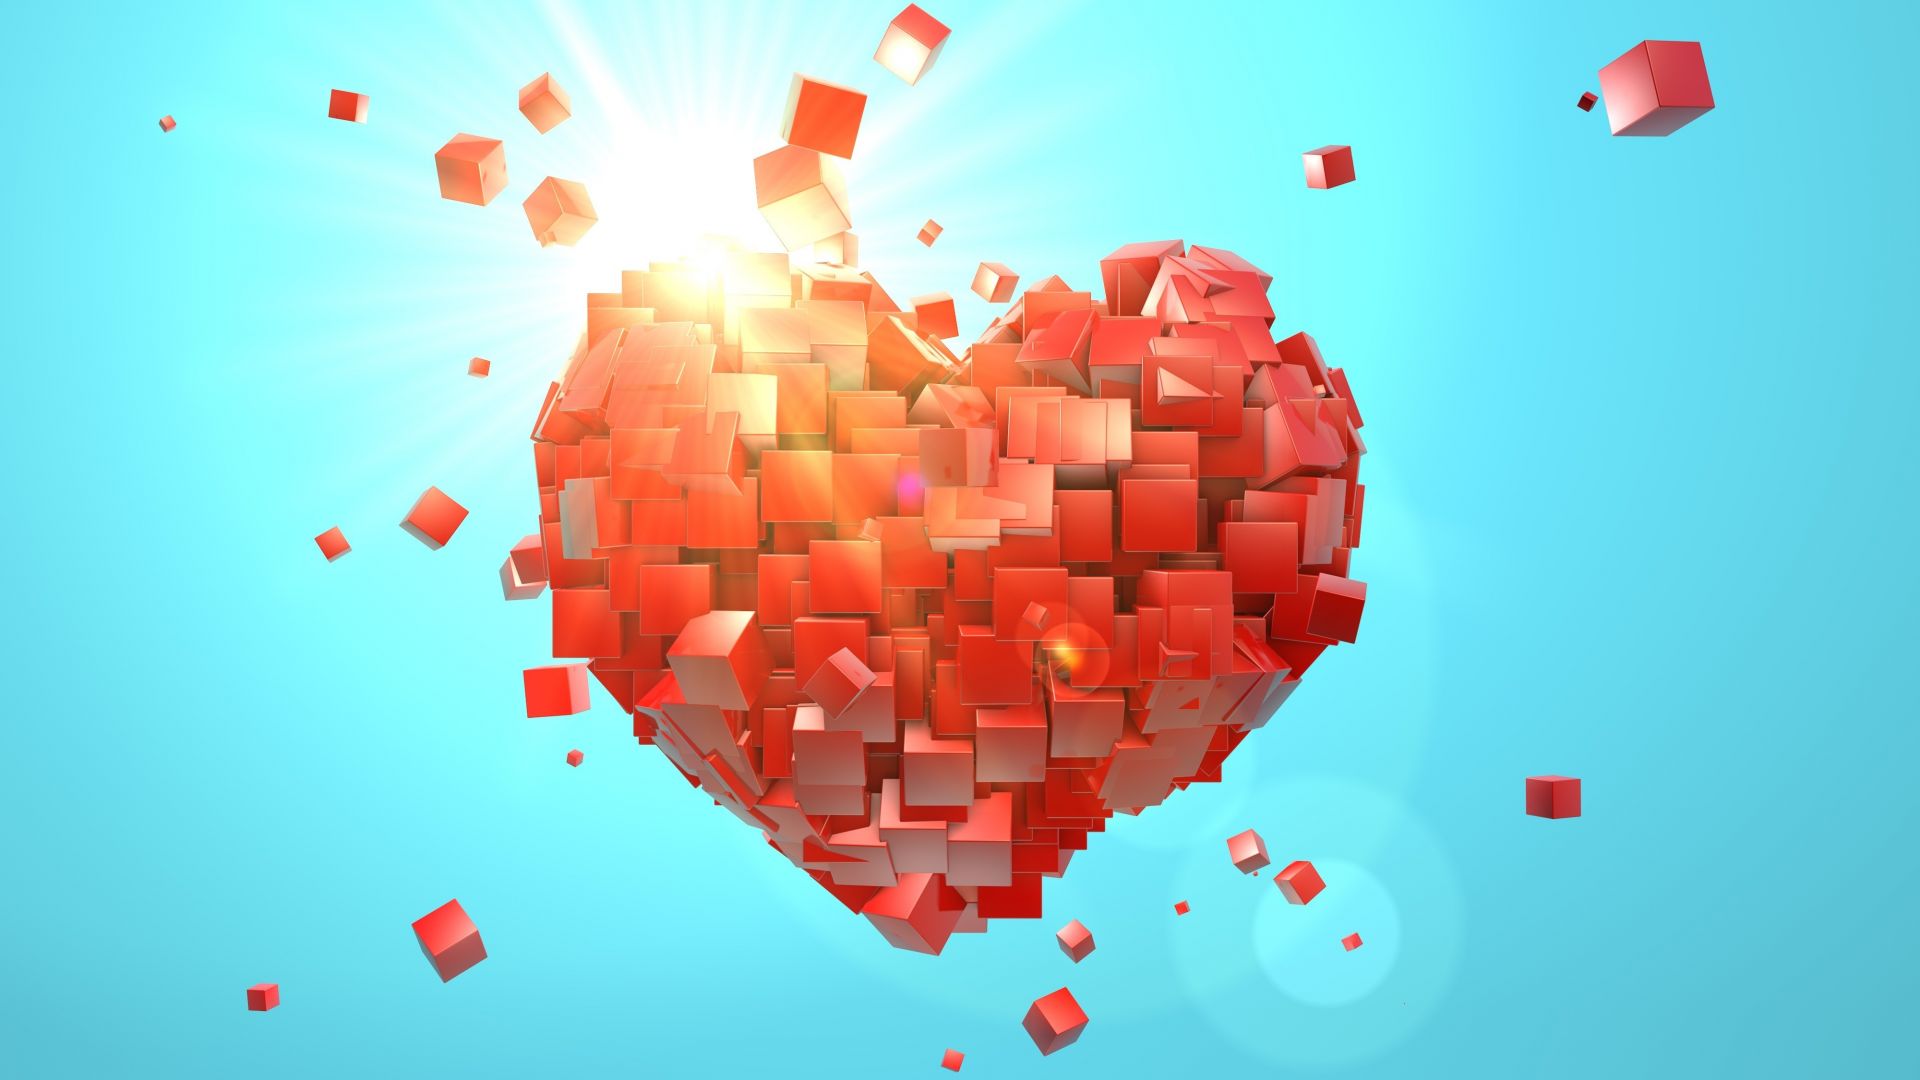 Desktop Wallpaper Heart Explosions, Love, Red Cubes, Abstract, Valentine  Day, 4k, Hd Image, Picture, Background, Edc8b0